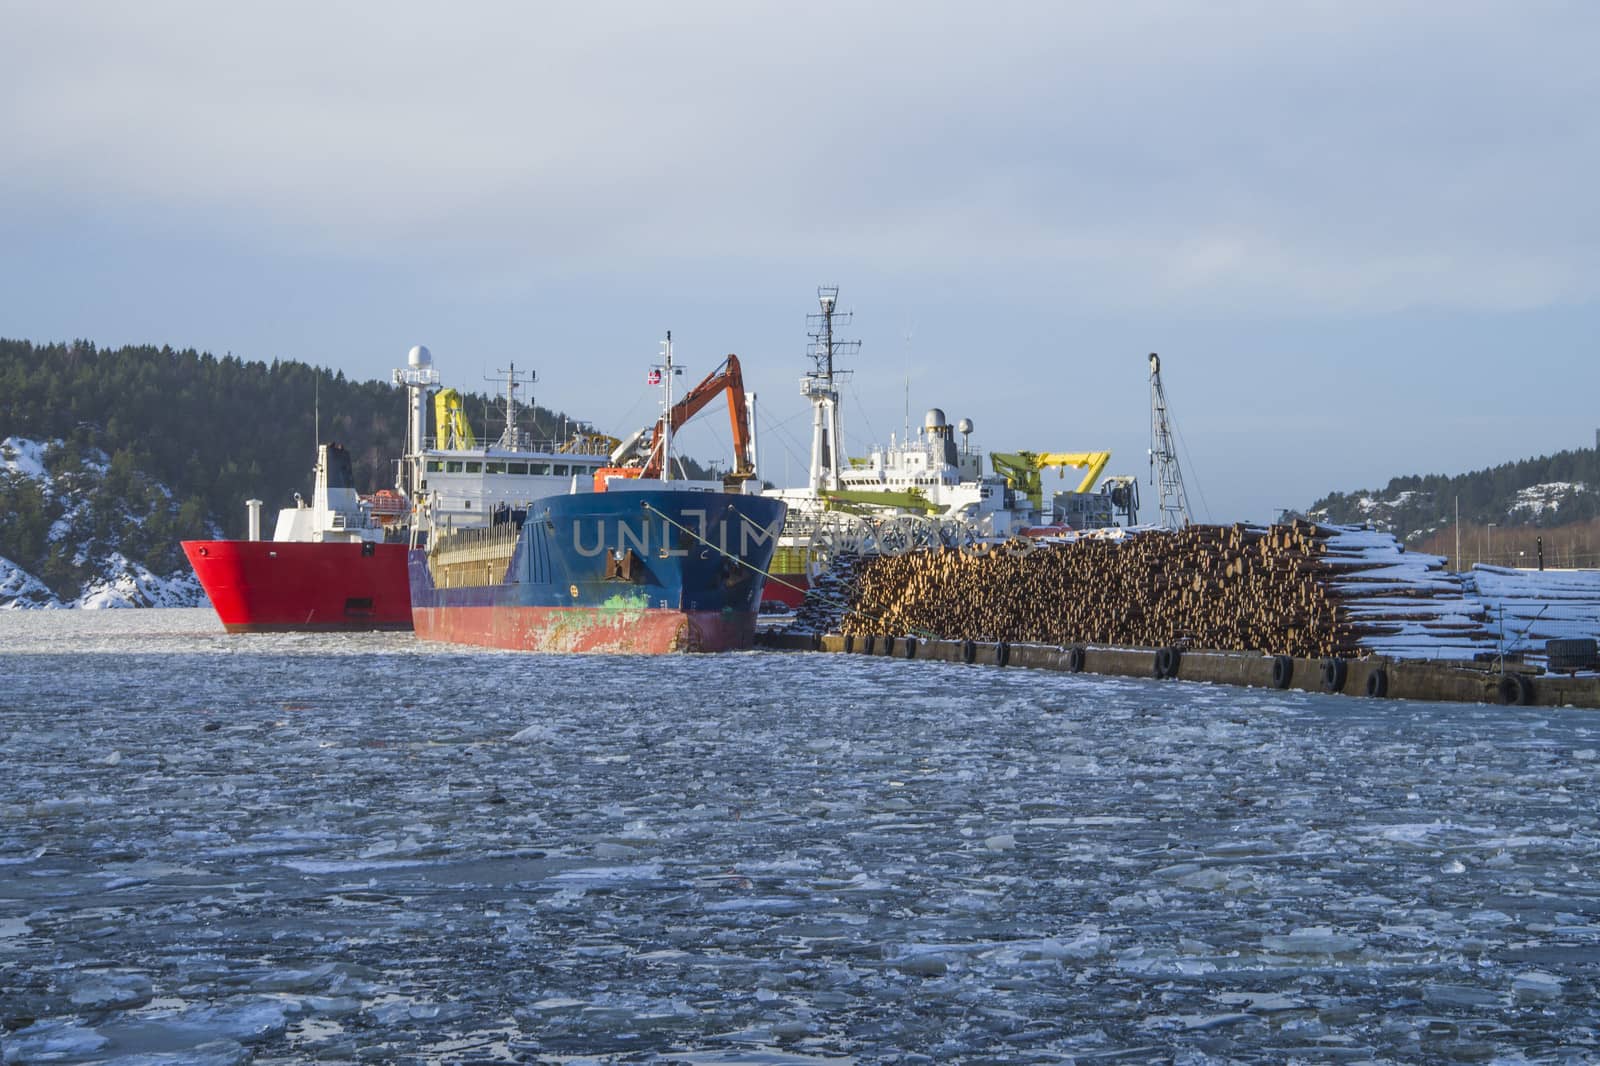 Mv Hagland Boss, are docked at the port of Halden, Norway and unloading timber.